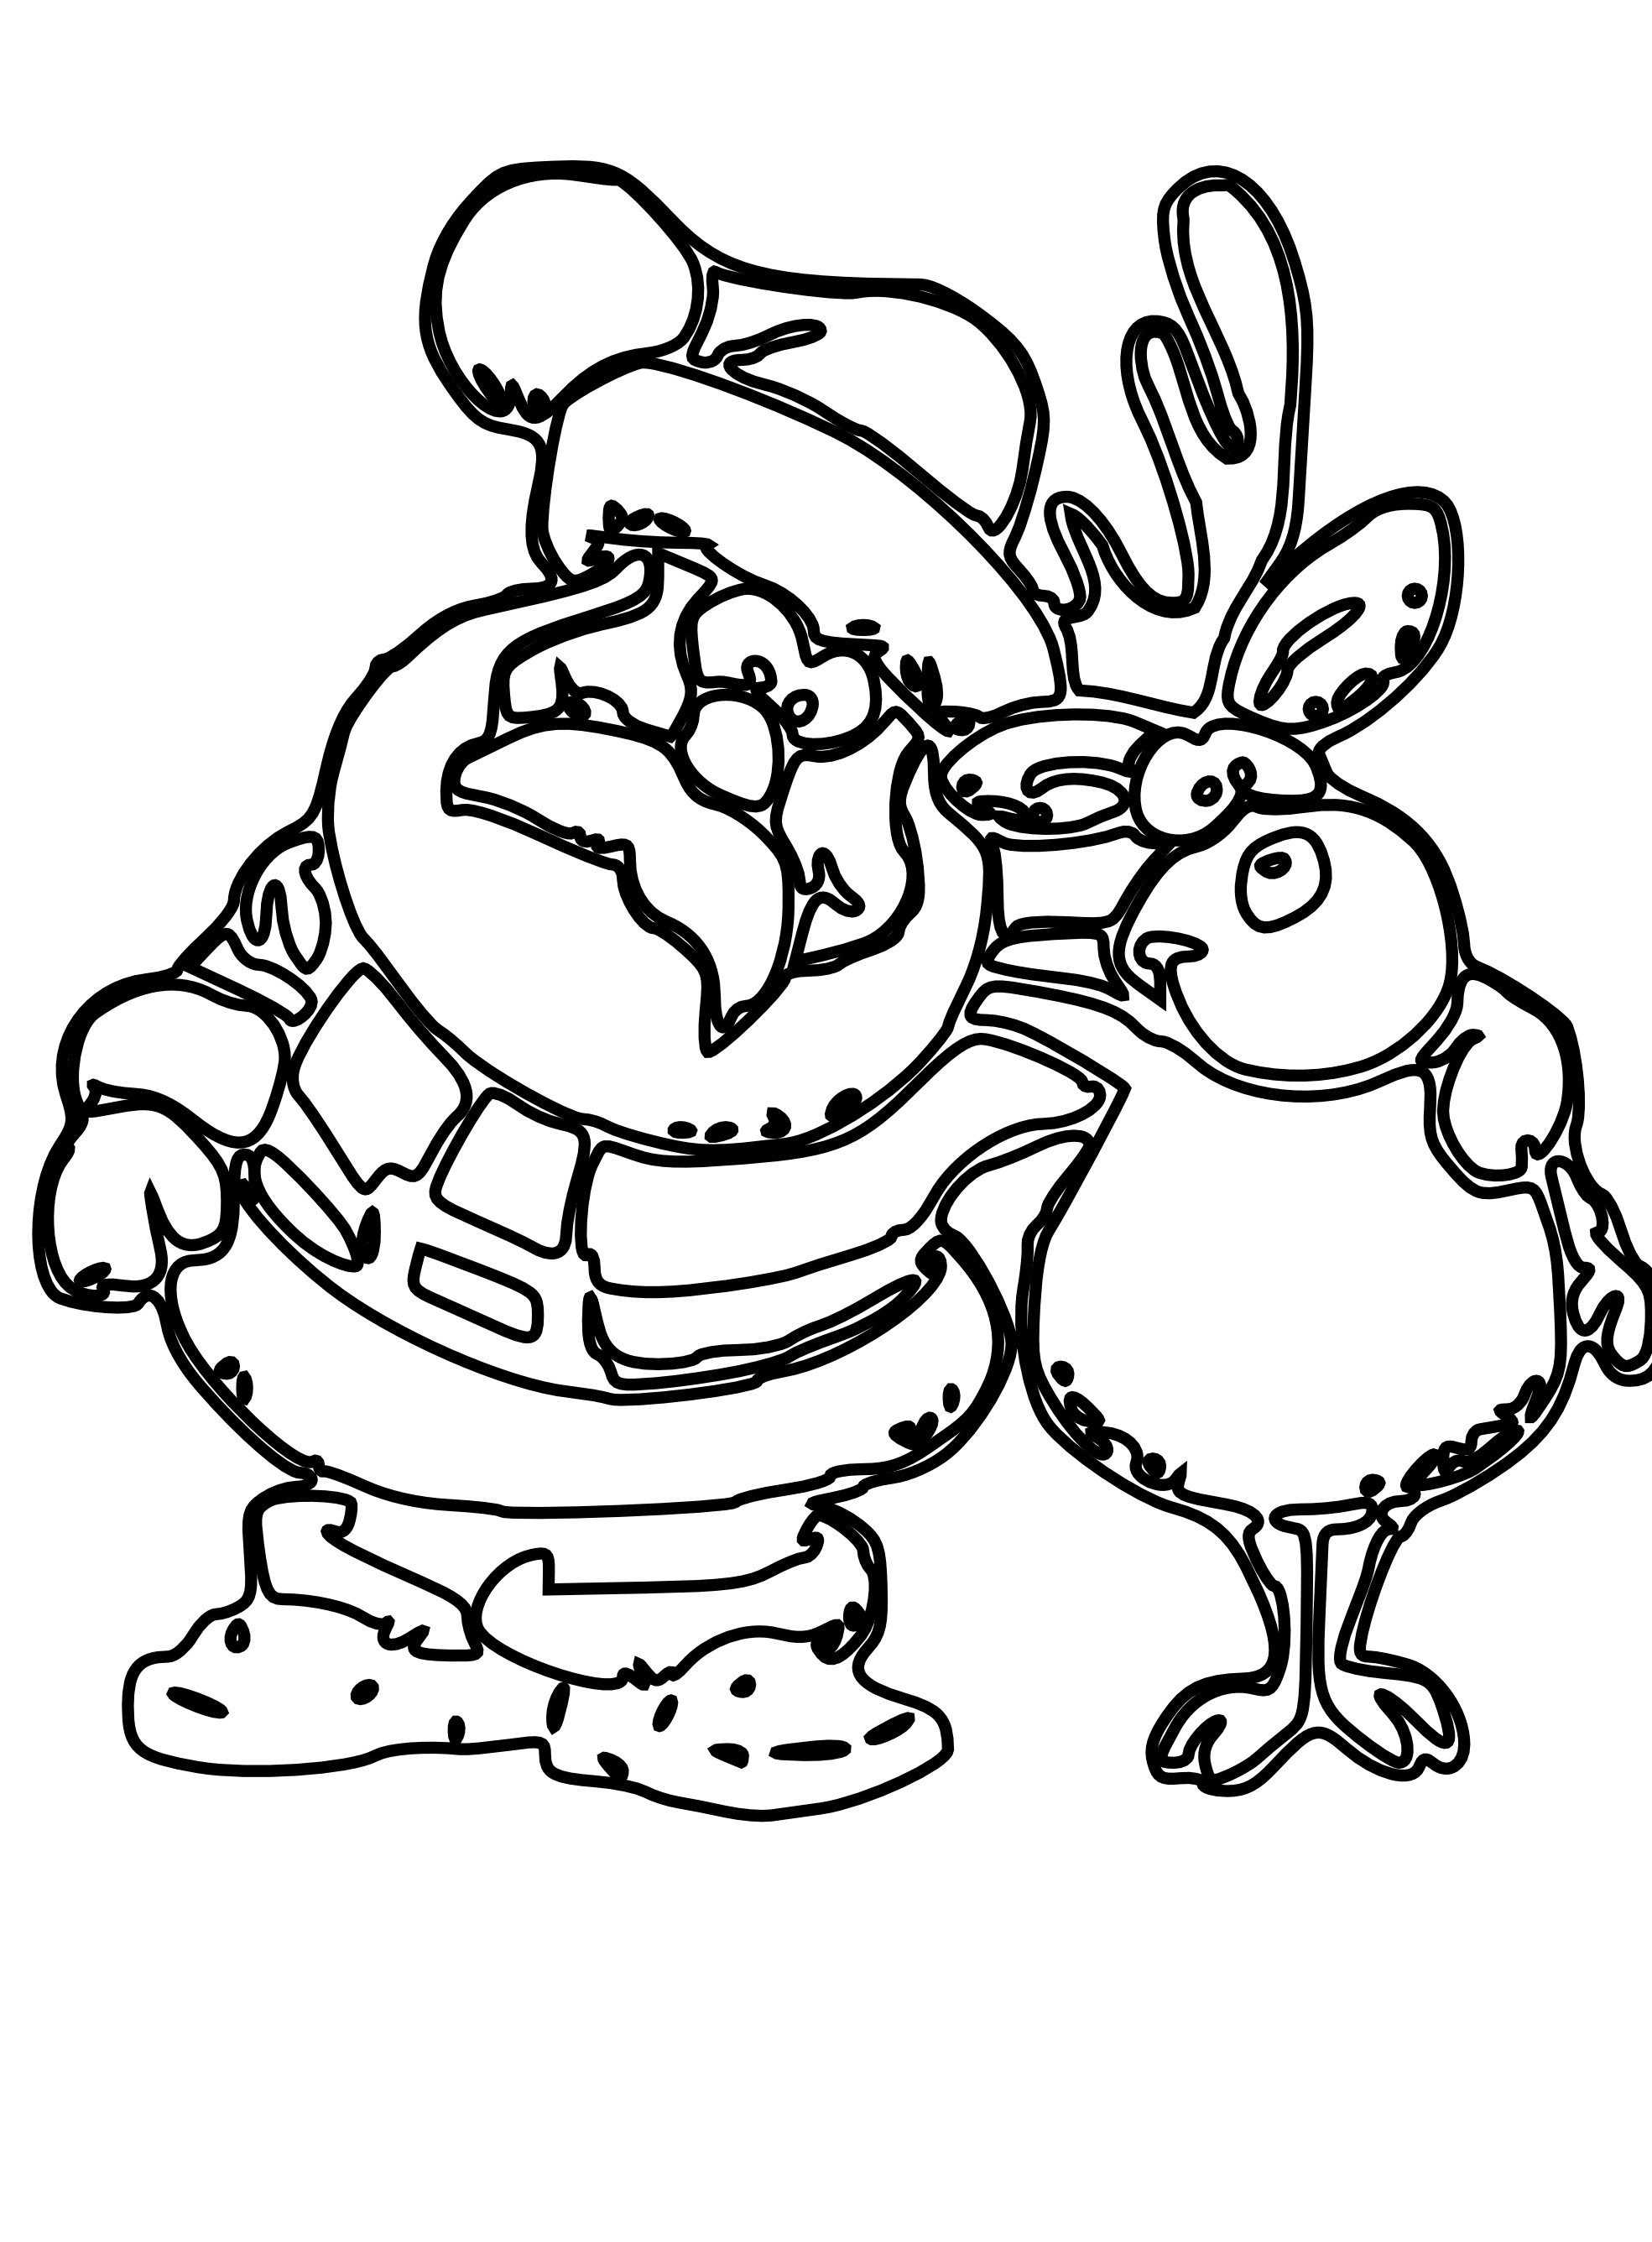 Walrus clipart coloring page. Reindeer black and white